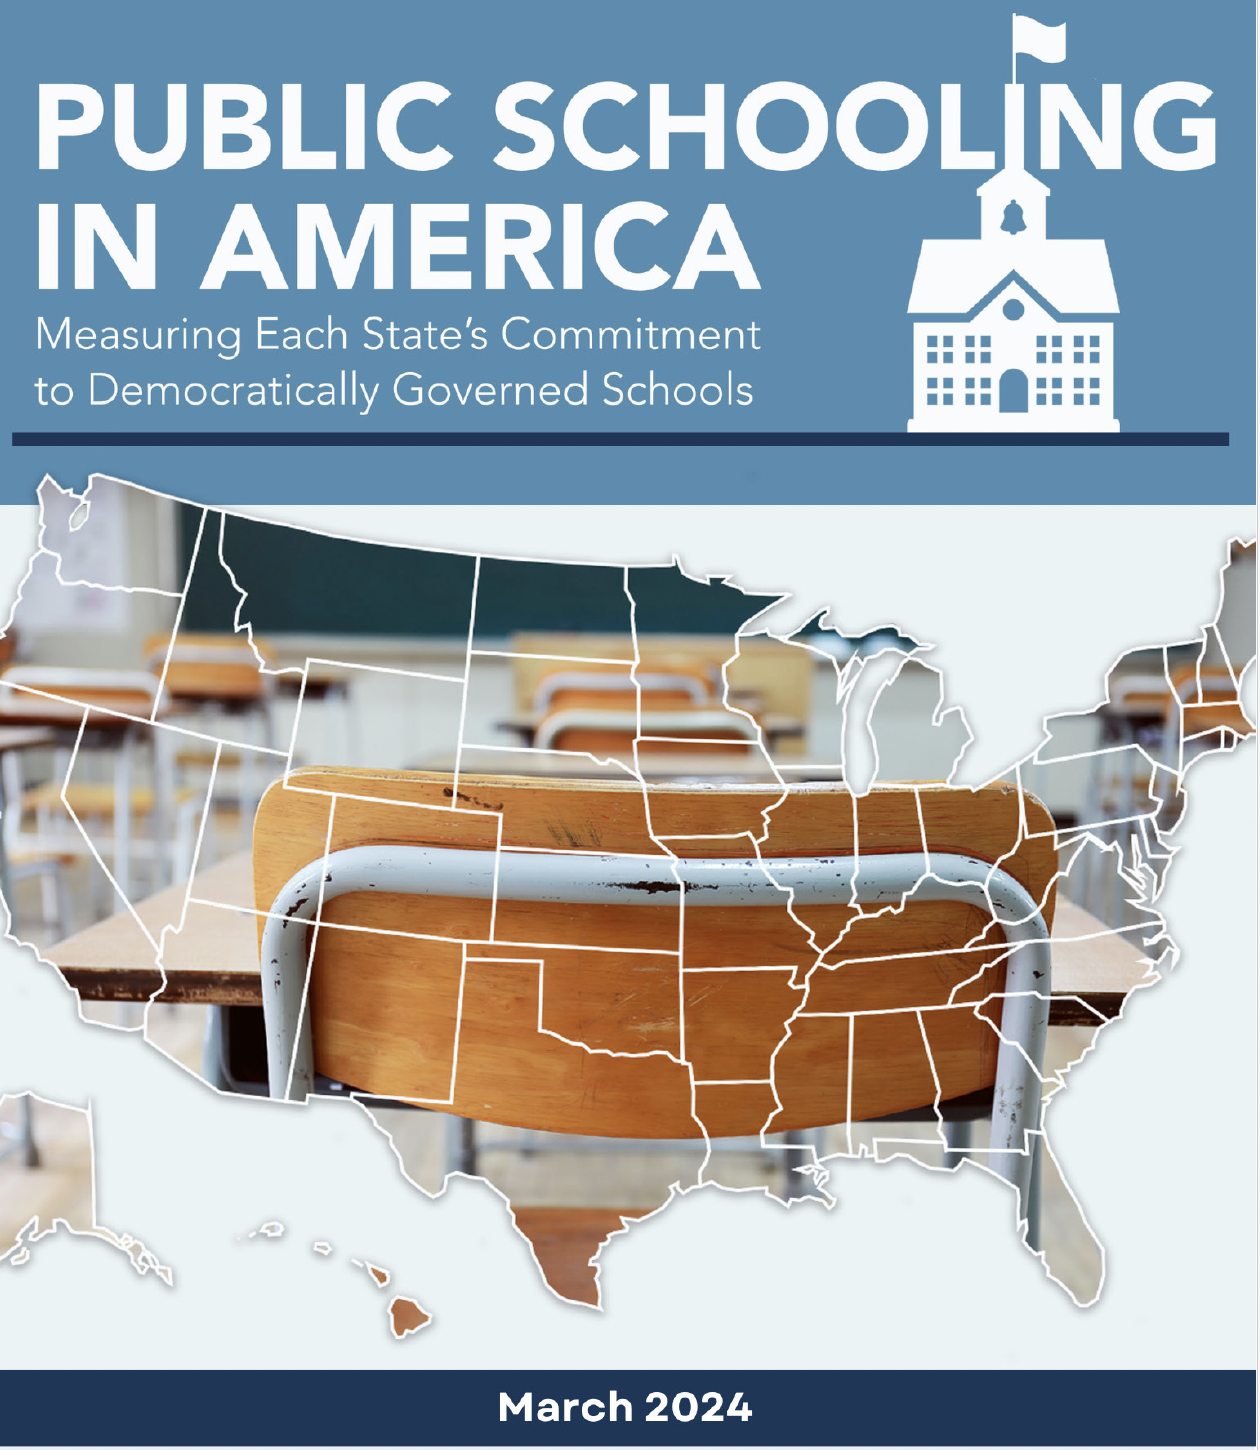 which statements are true about public education in america